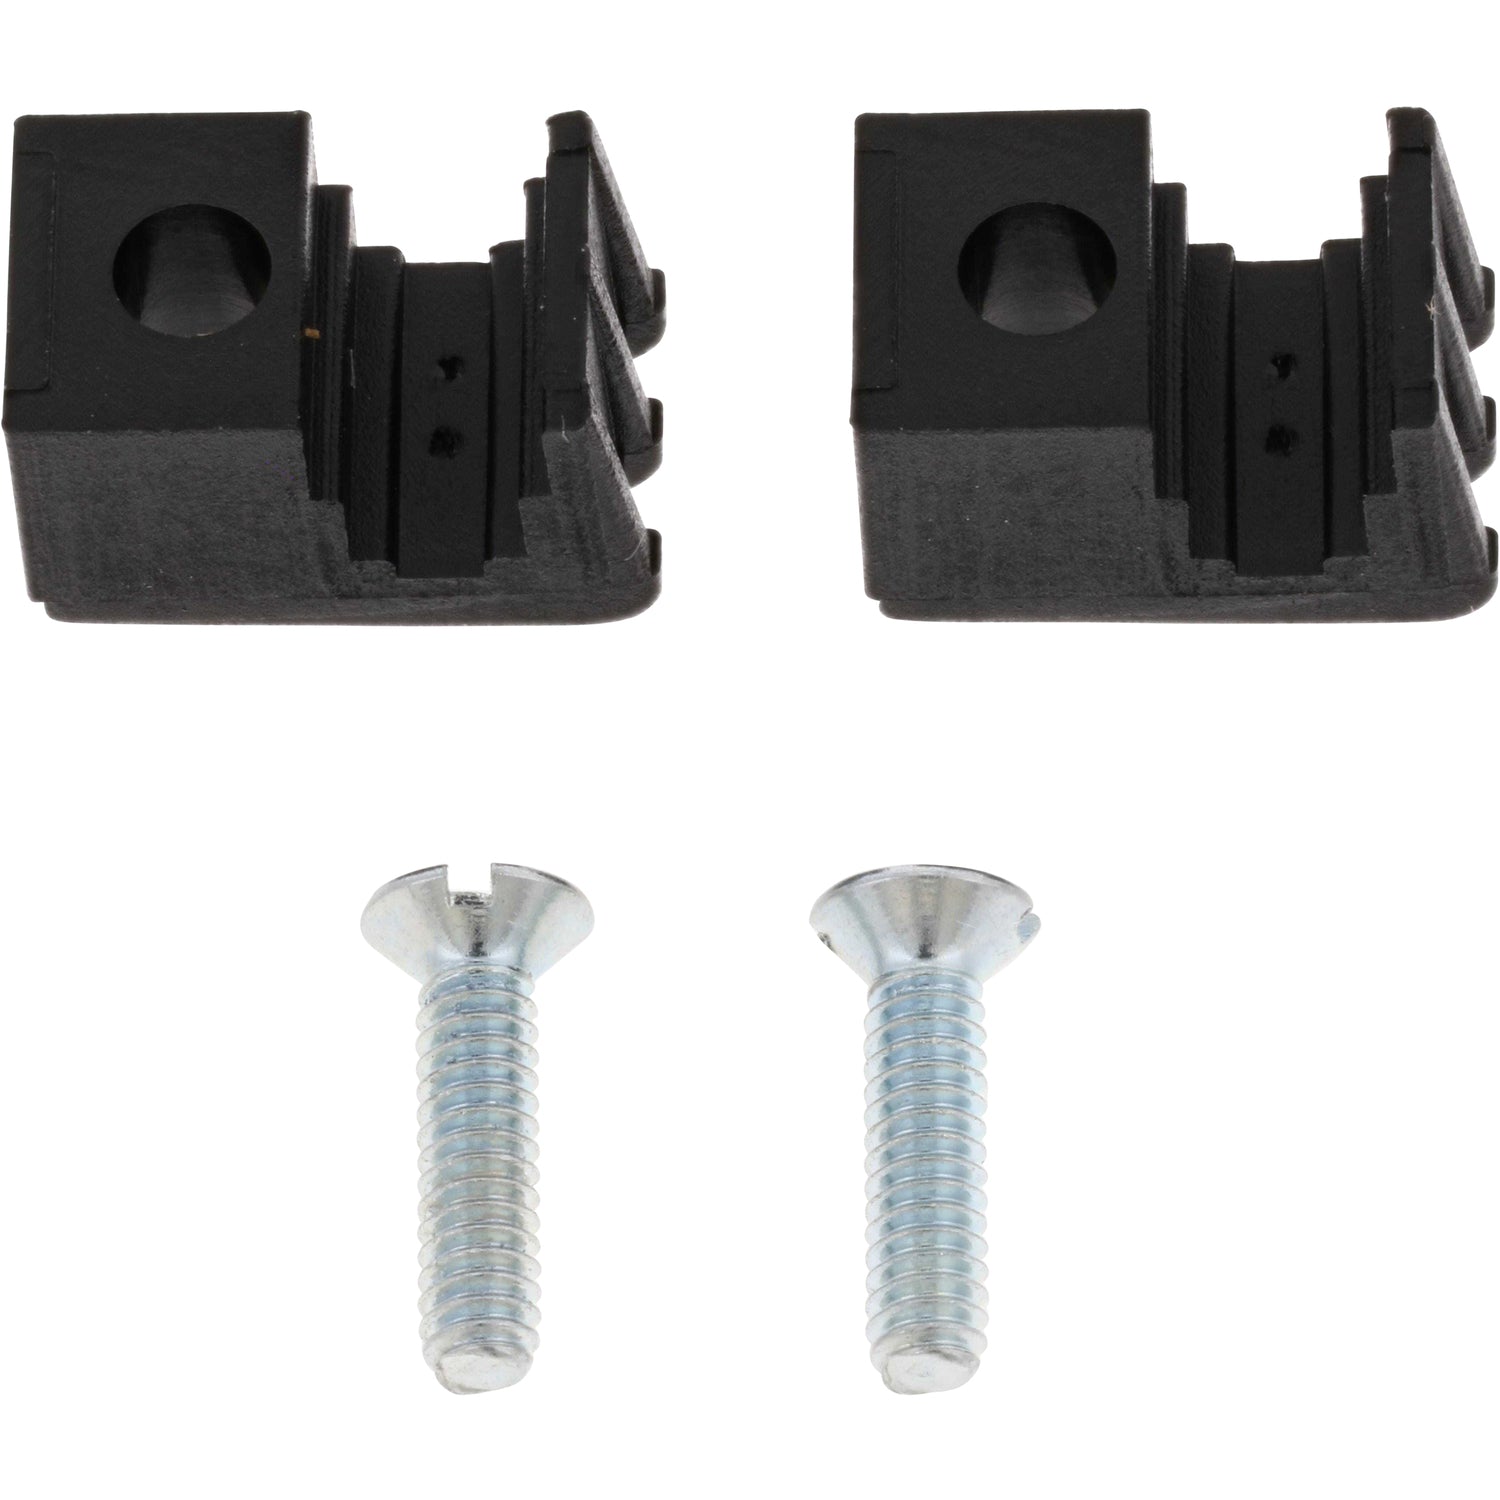 Two small black plastic mounting brackets with two nickel plated fasteners on a white background. 550661